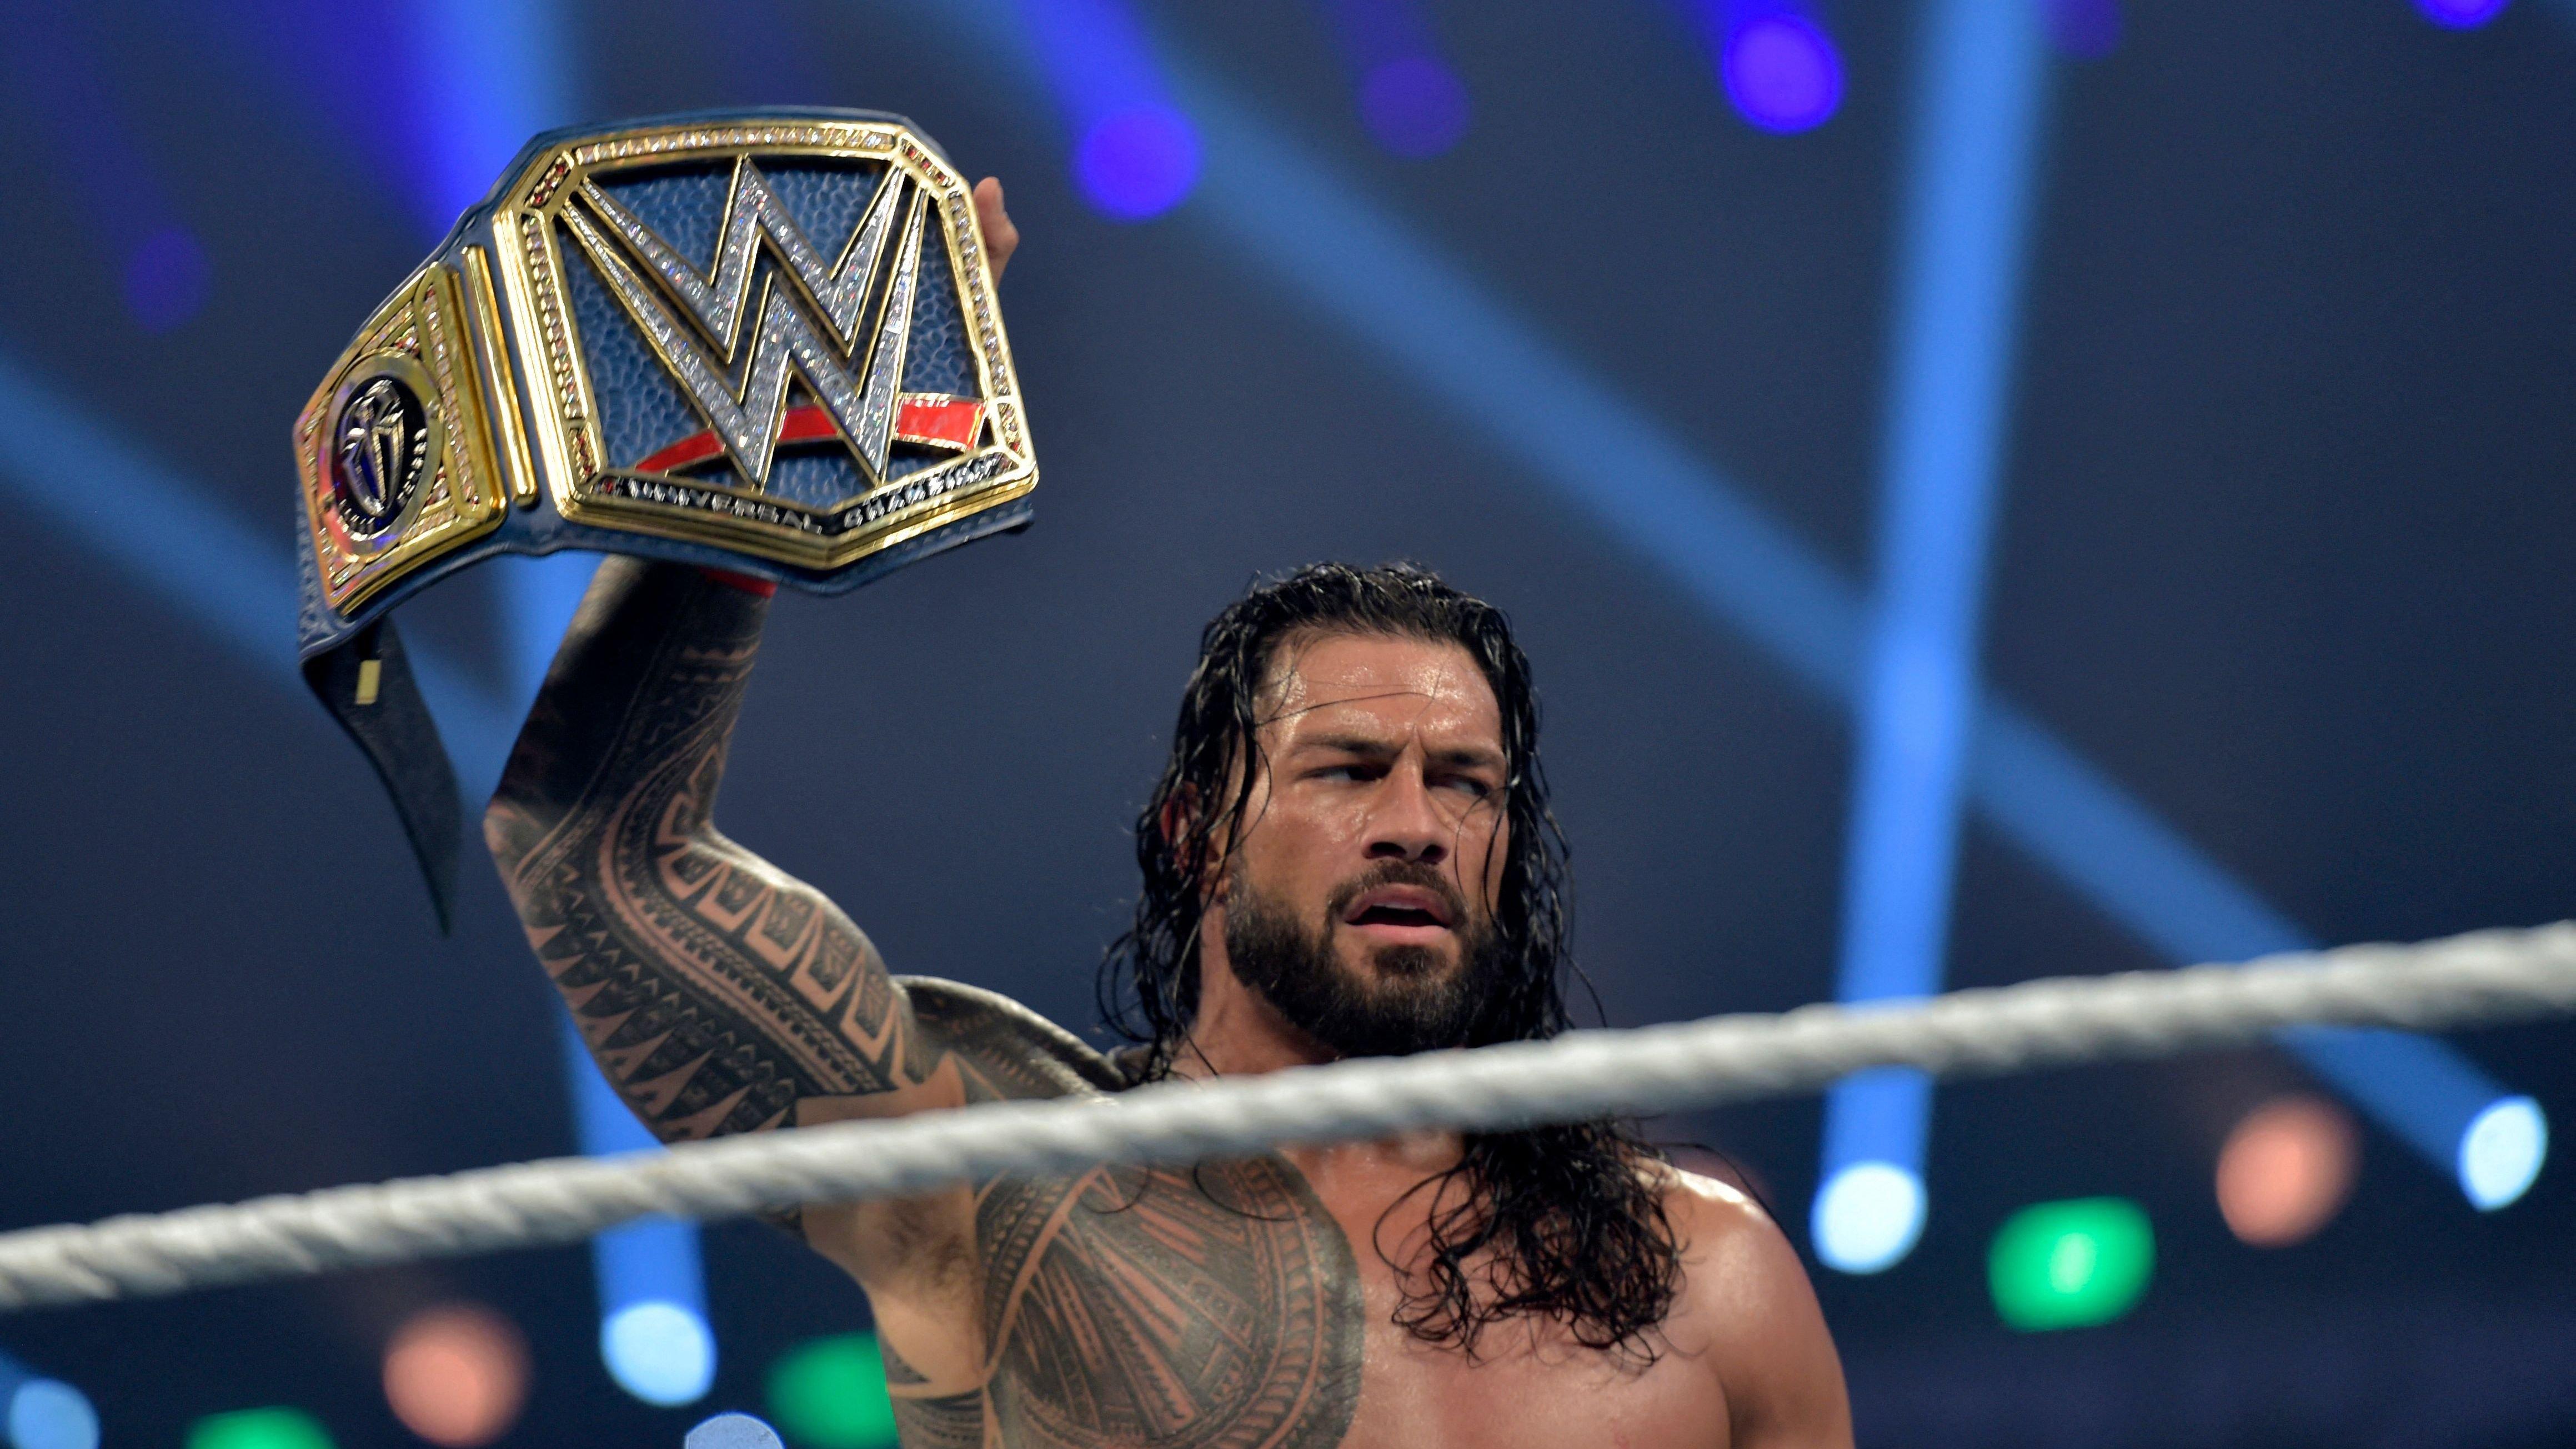 Roman Reigns standing in the WWE ring holding the WWE Universal Championship Belt 